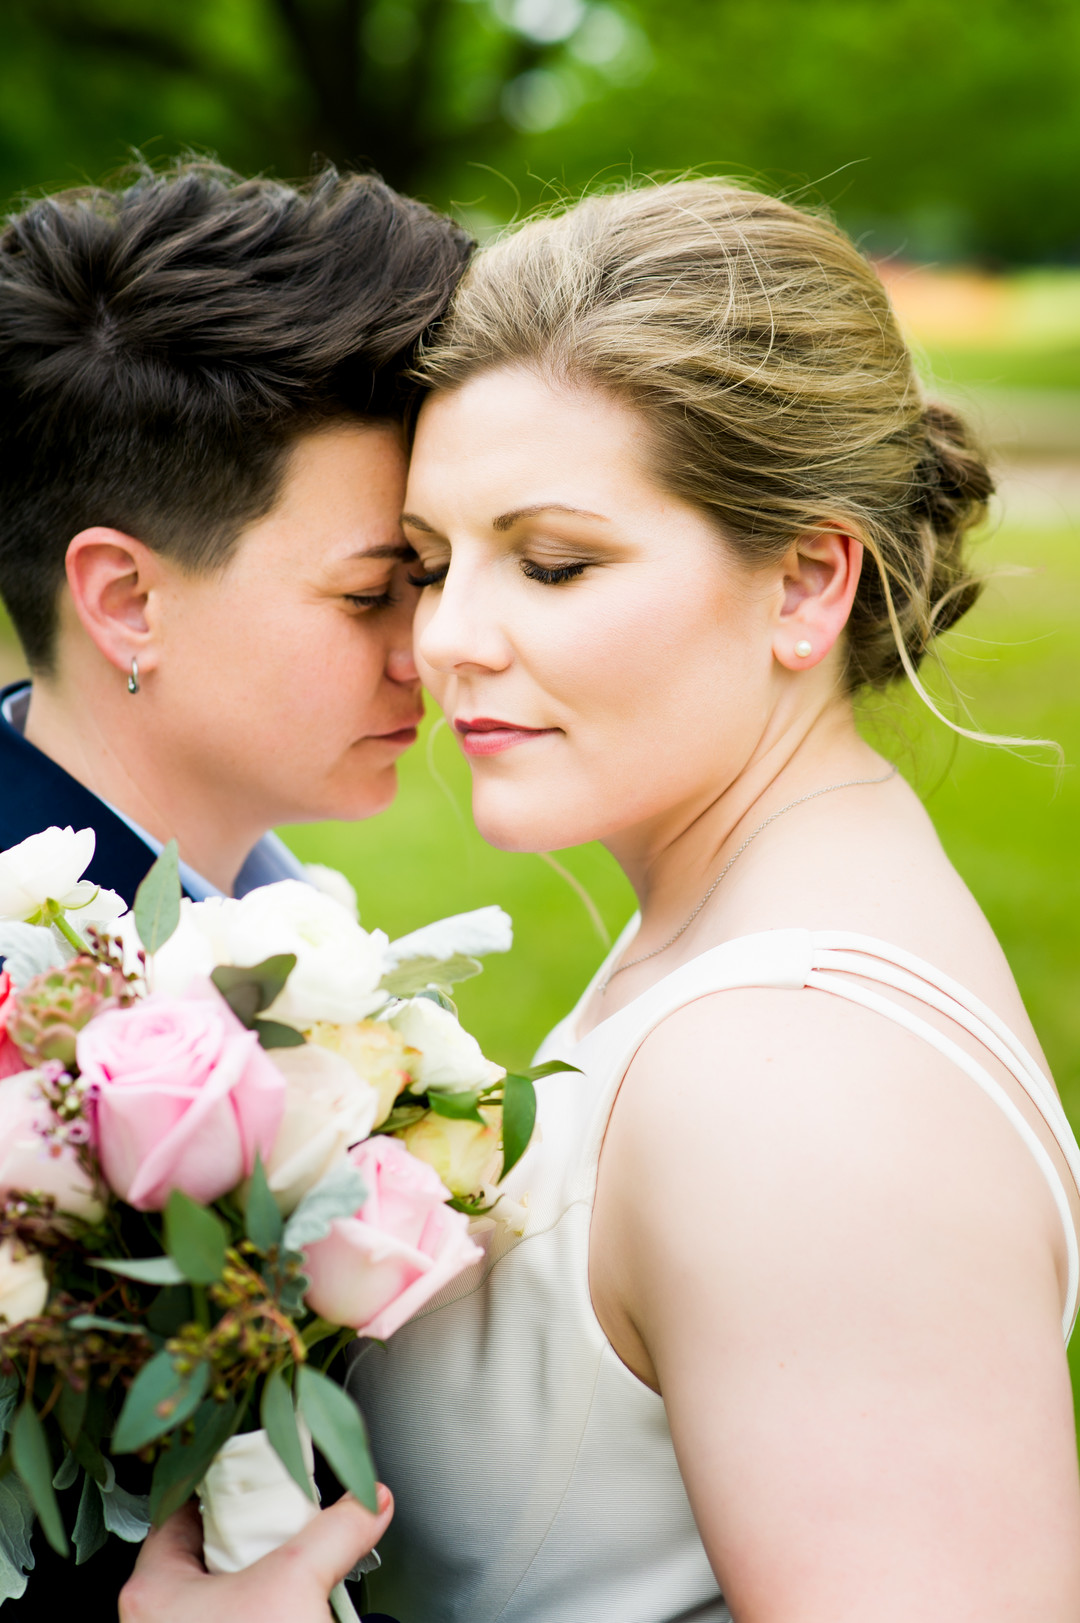 Intimate spring wedding at Butler Park in Austin, Texas LGBTQ+ weddings lesbian wedding two brides white dress navy blue suit